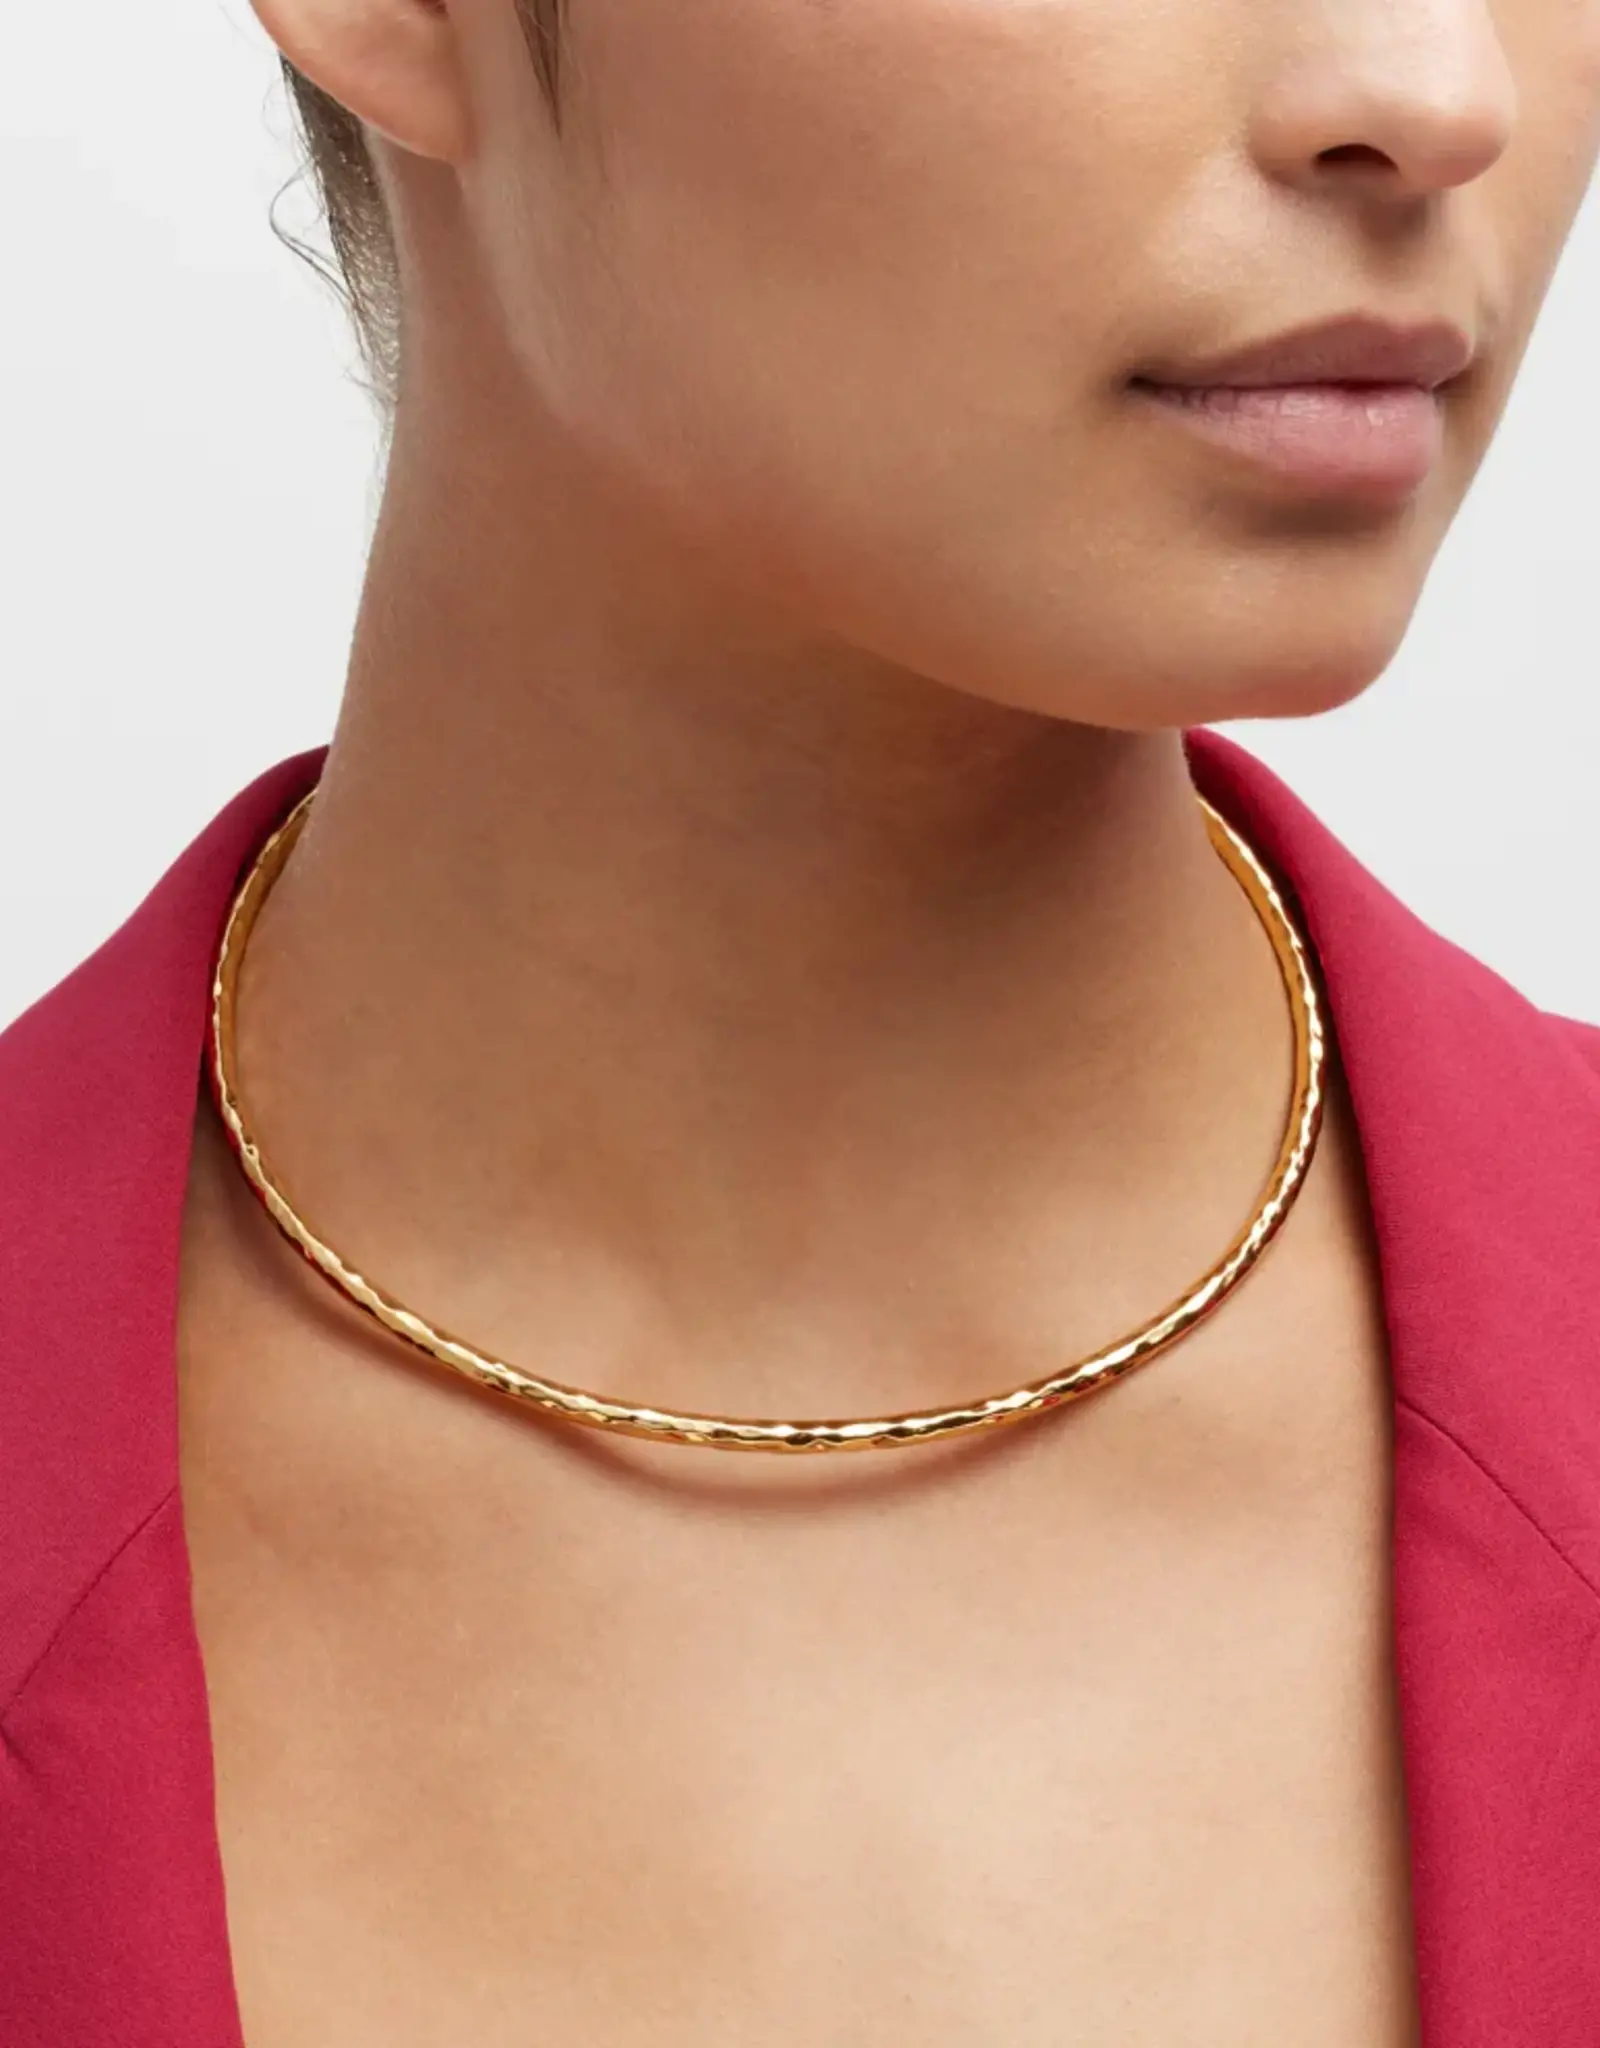 NEST Jewelry NEST Hammered Gold Collar Necklace